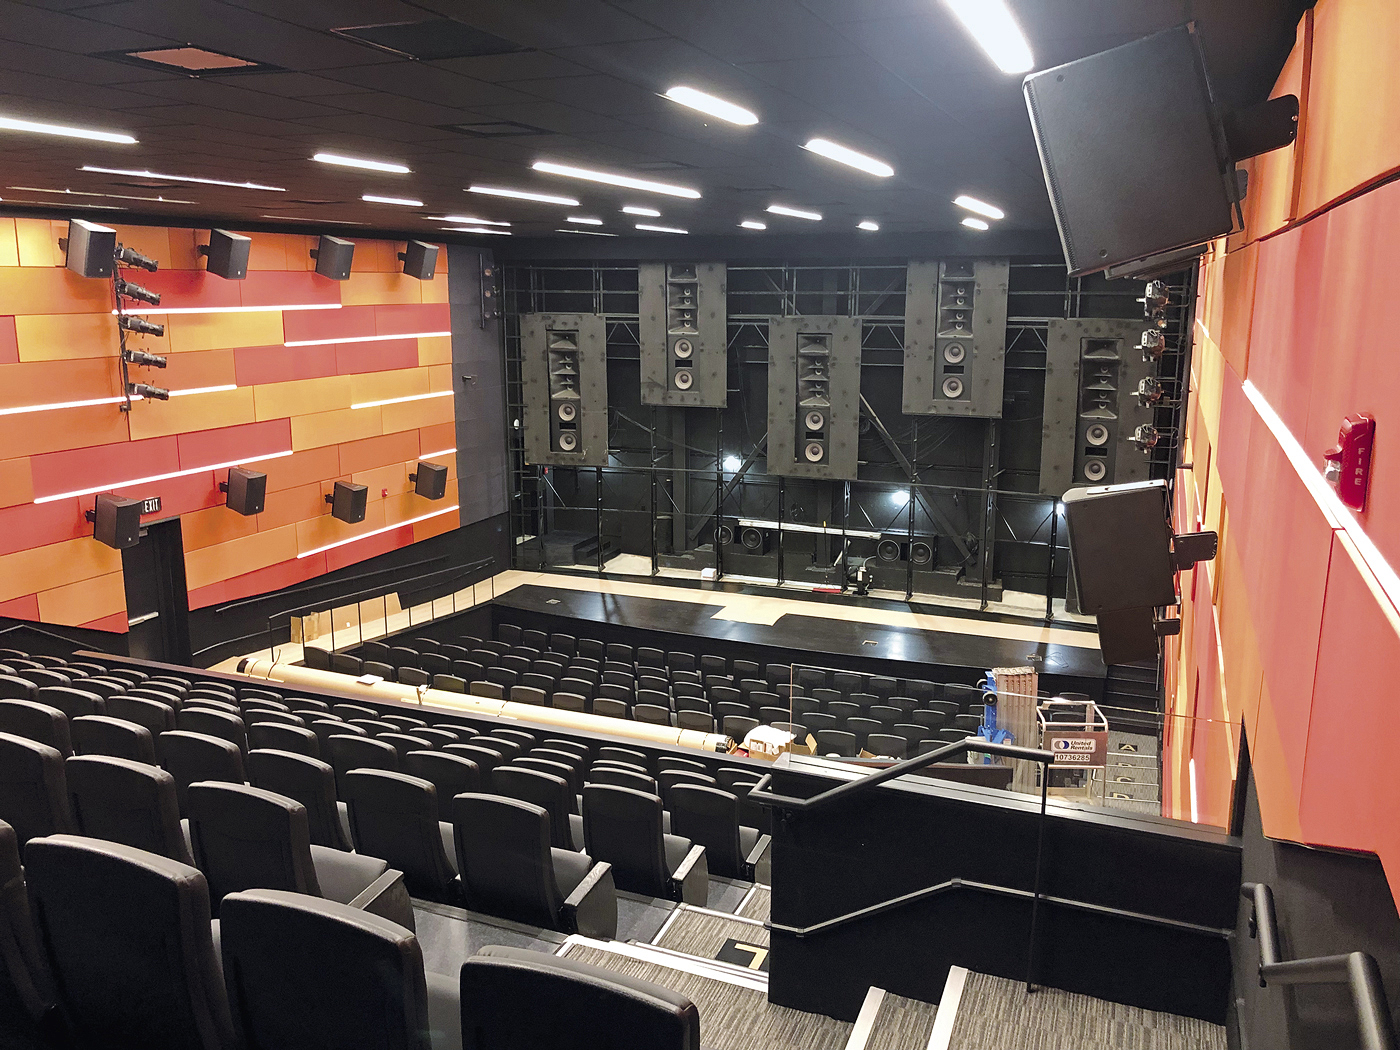 The AV installation is designed to avoid disruption of the Cinemark Theater’s projection and speaker systems.